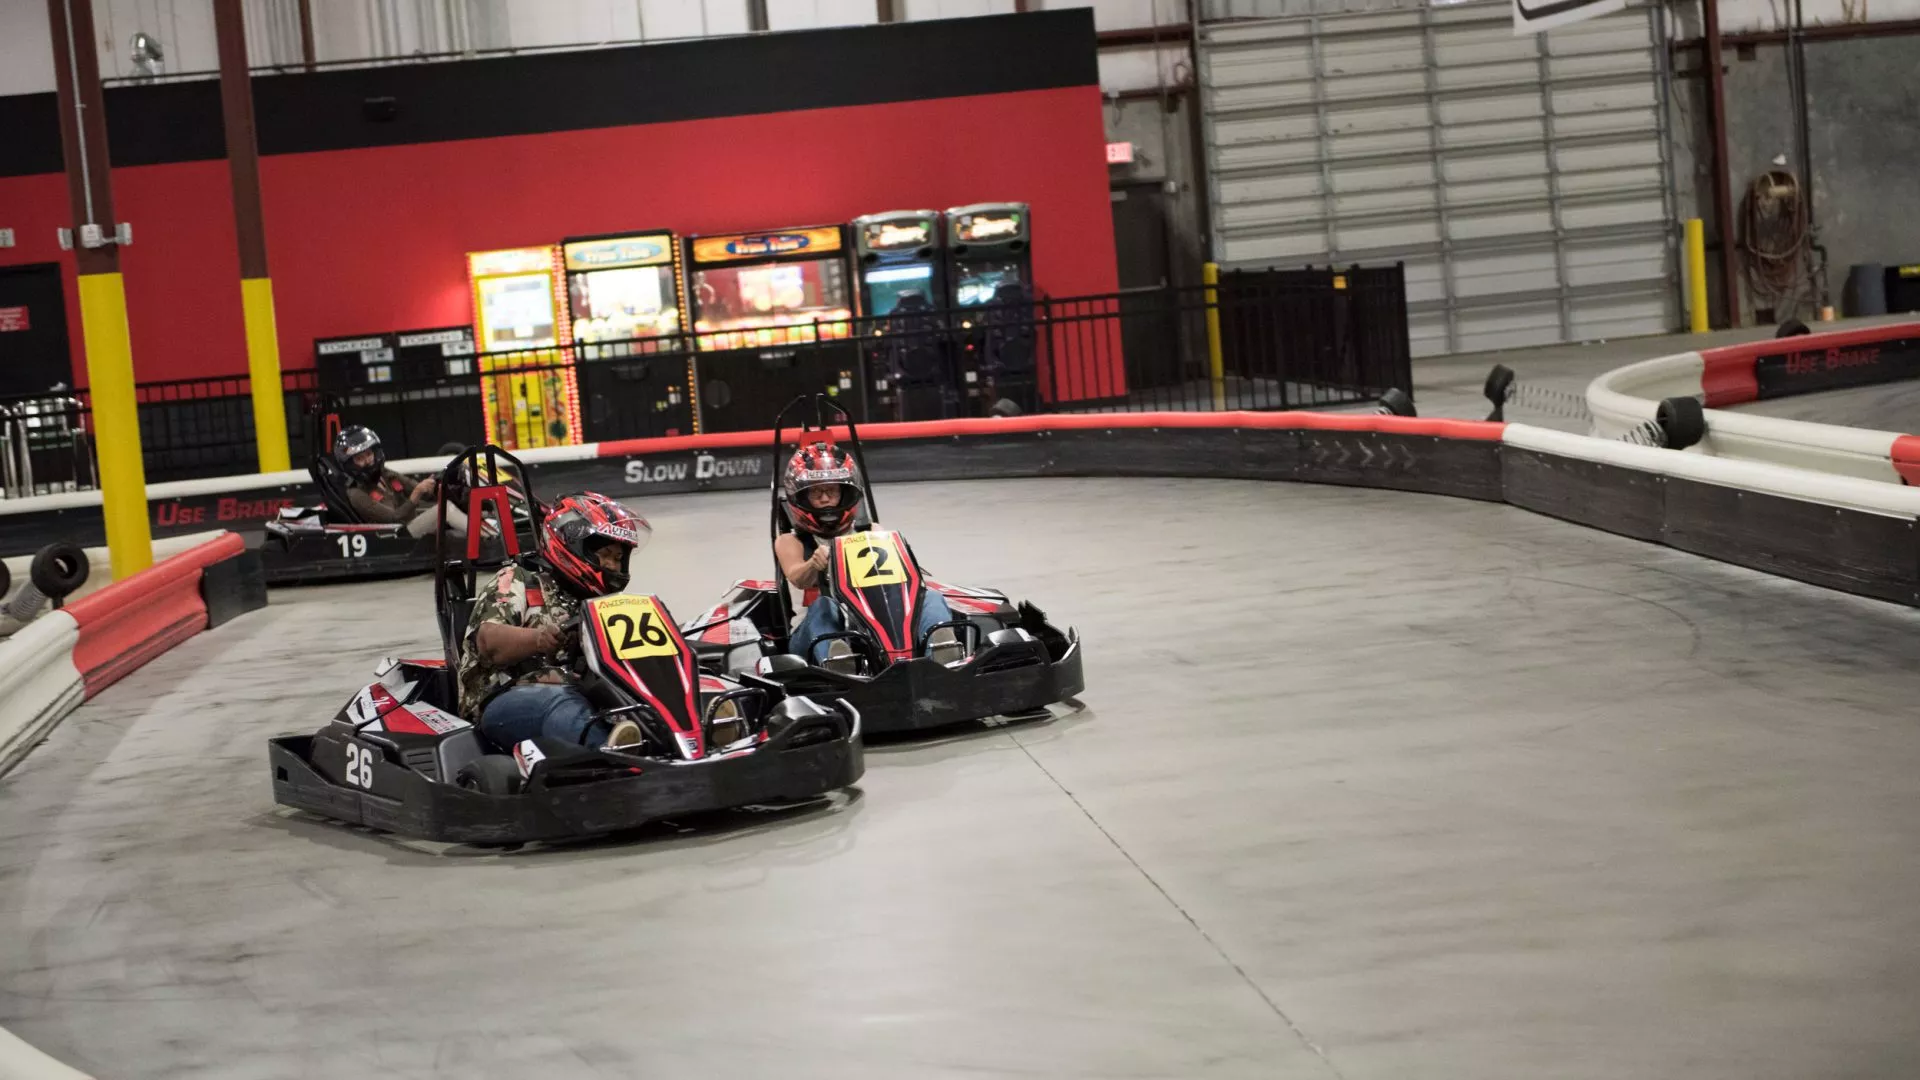 Autobahn Indoor Speedway & Events in USA, North America | Karting - Rated 5.1